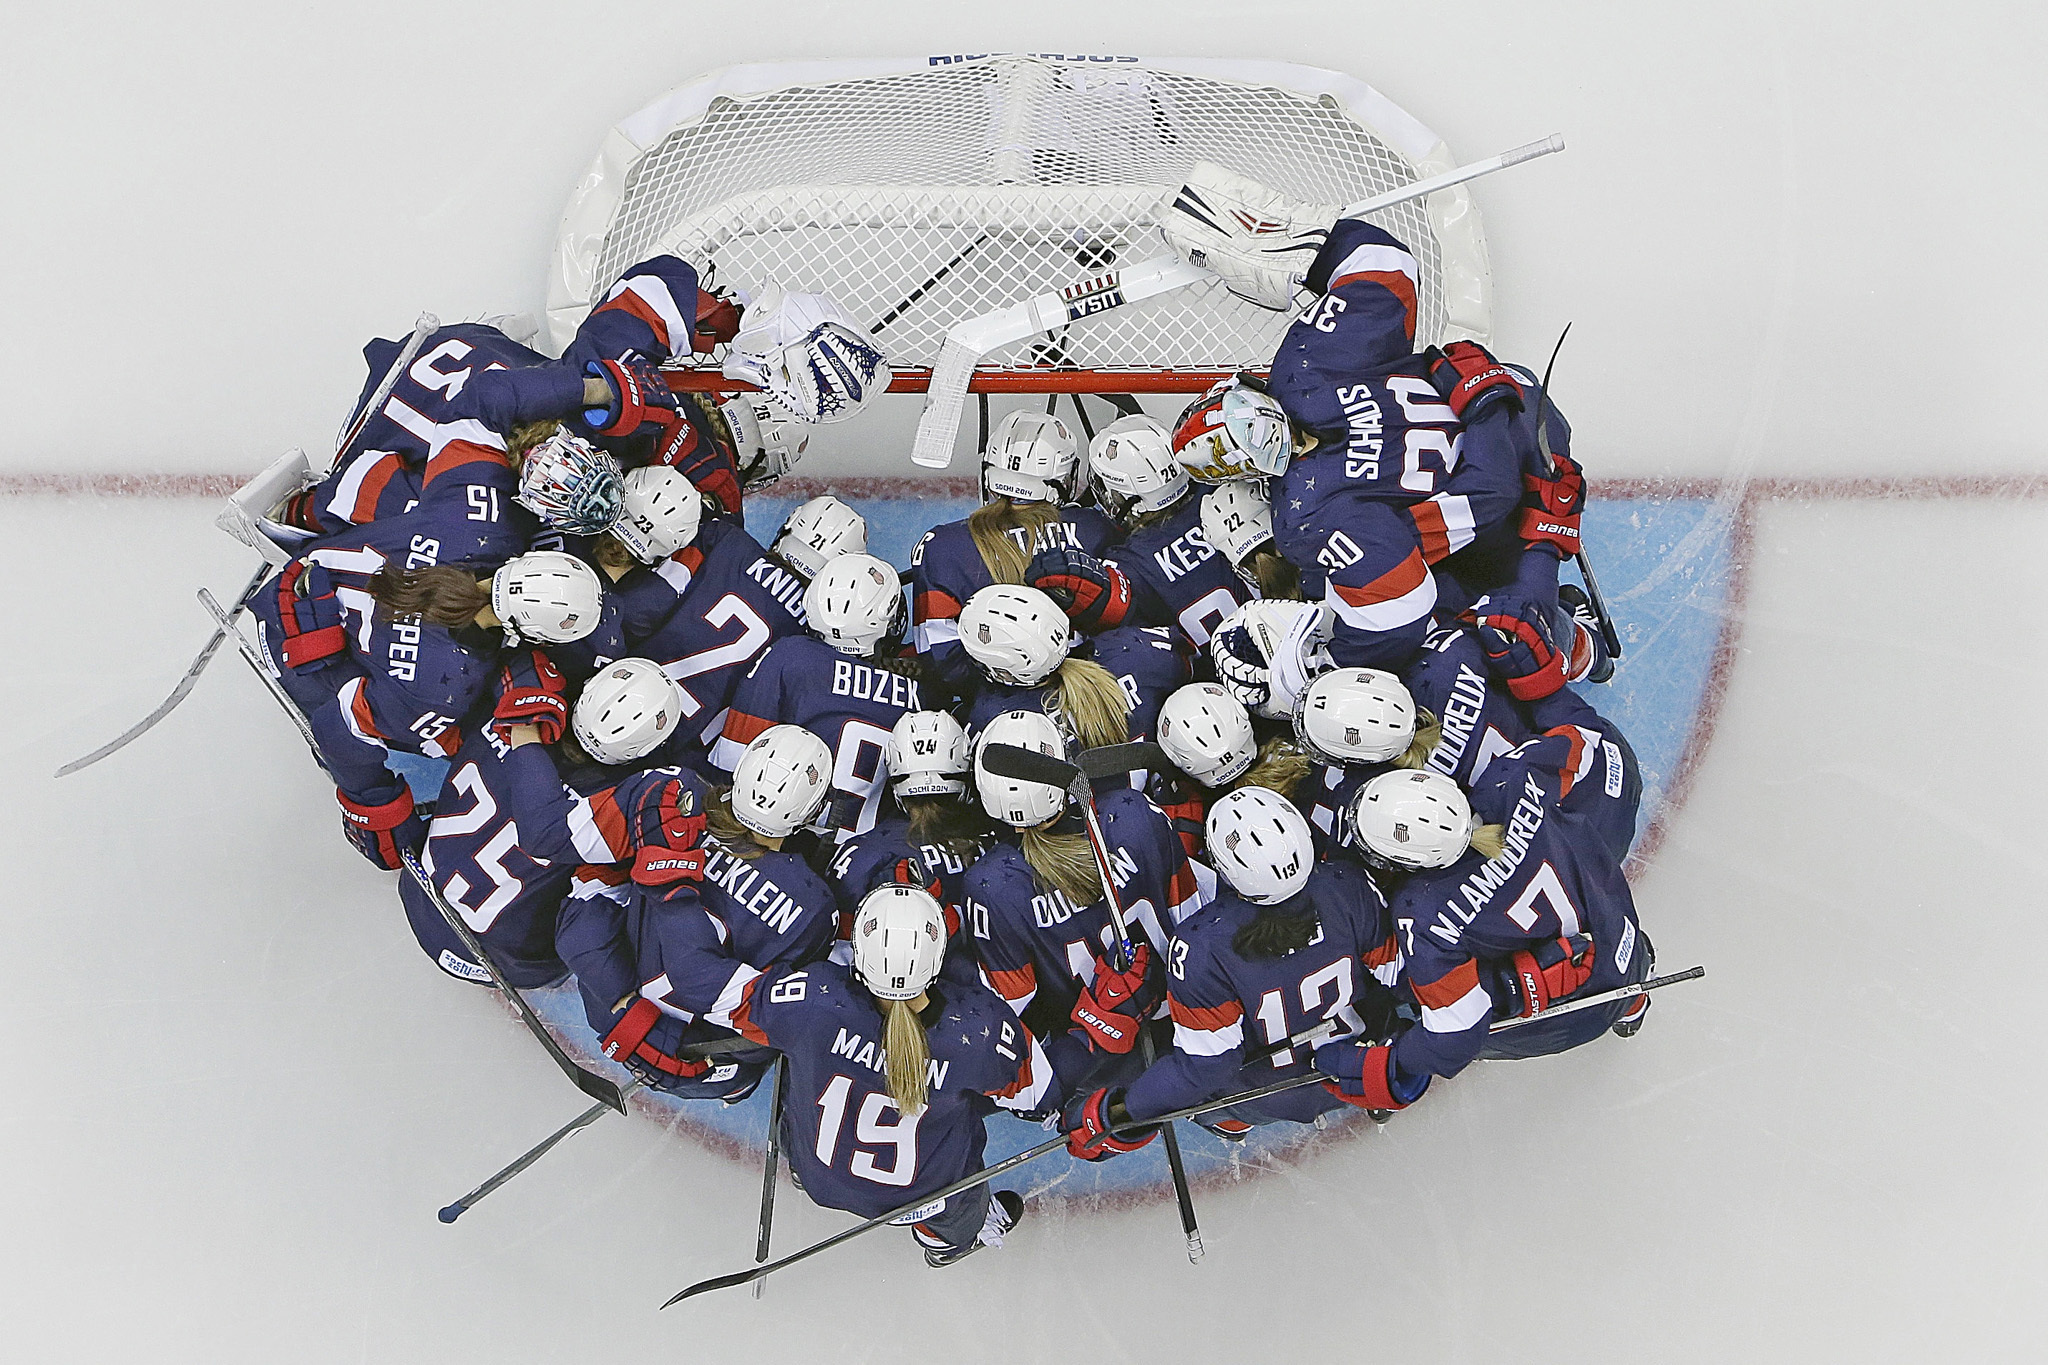 Team USA Women's hockey at the Olympics in Sochi wallpapers and images